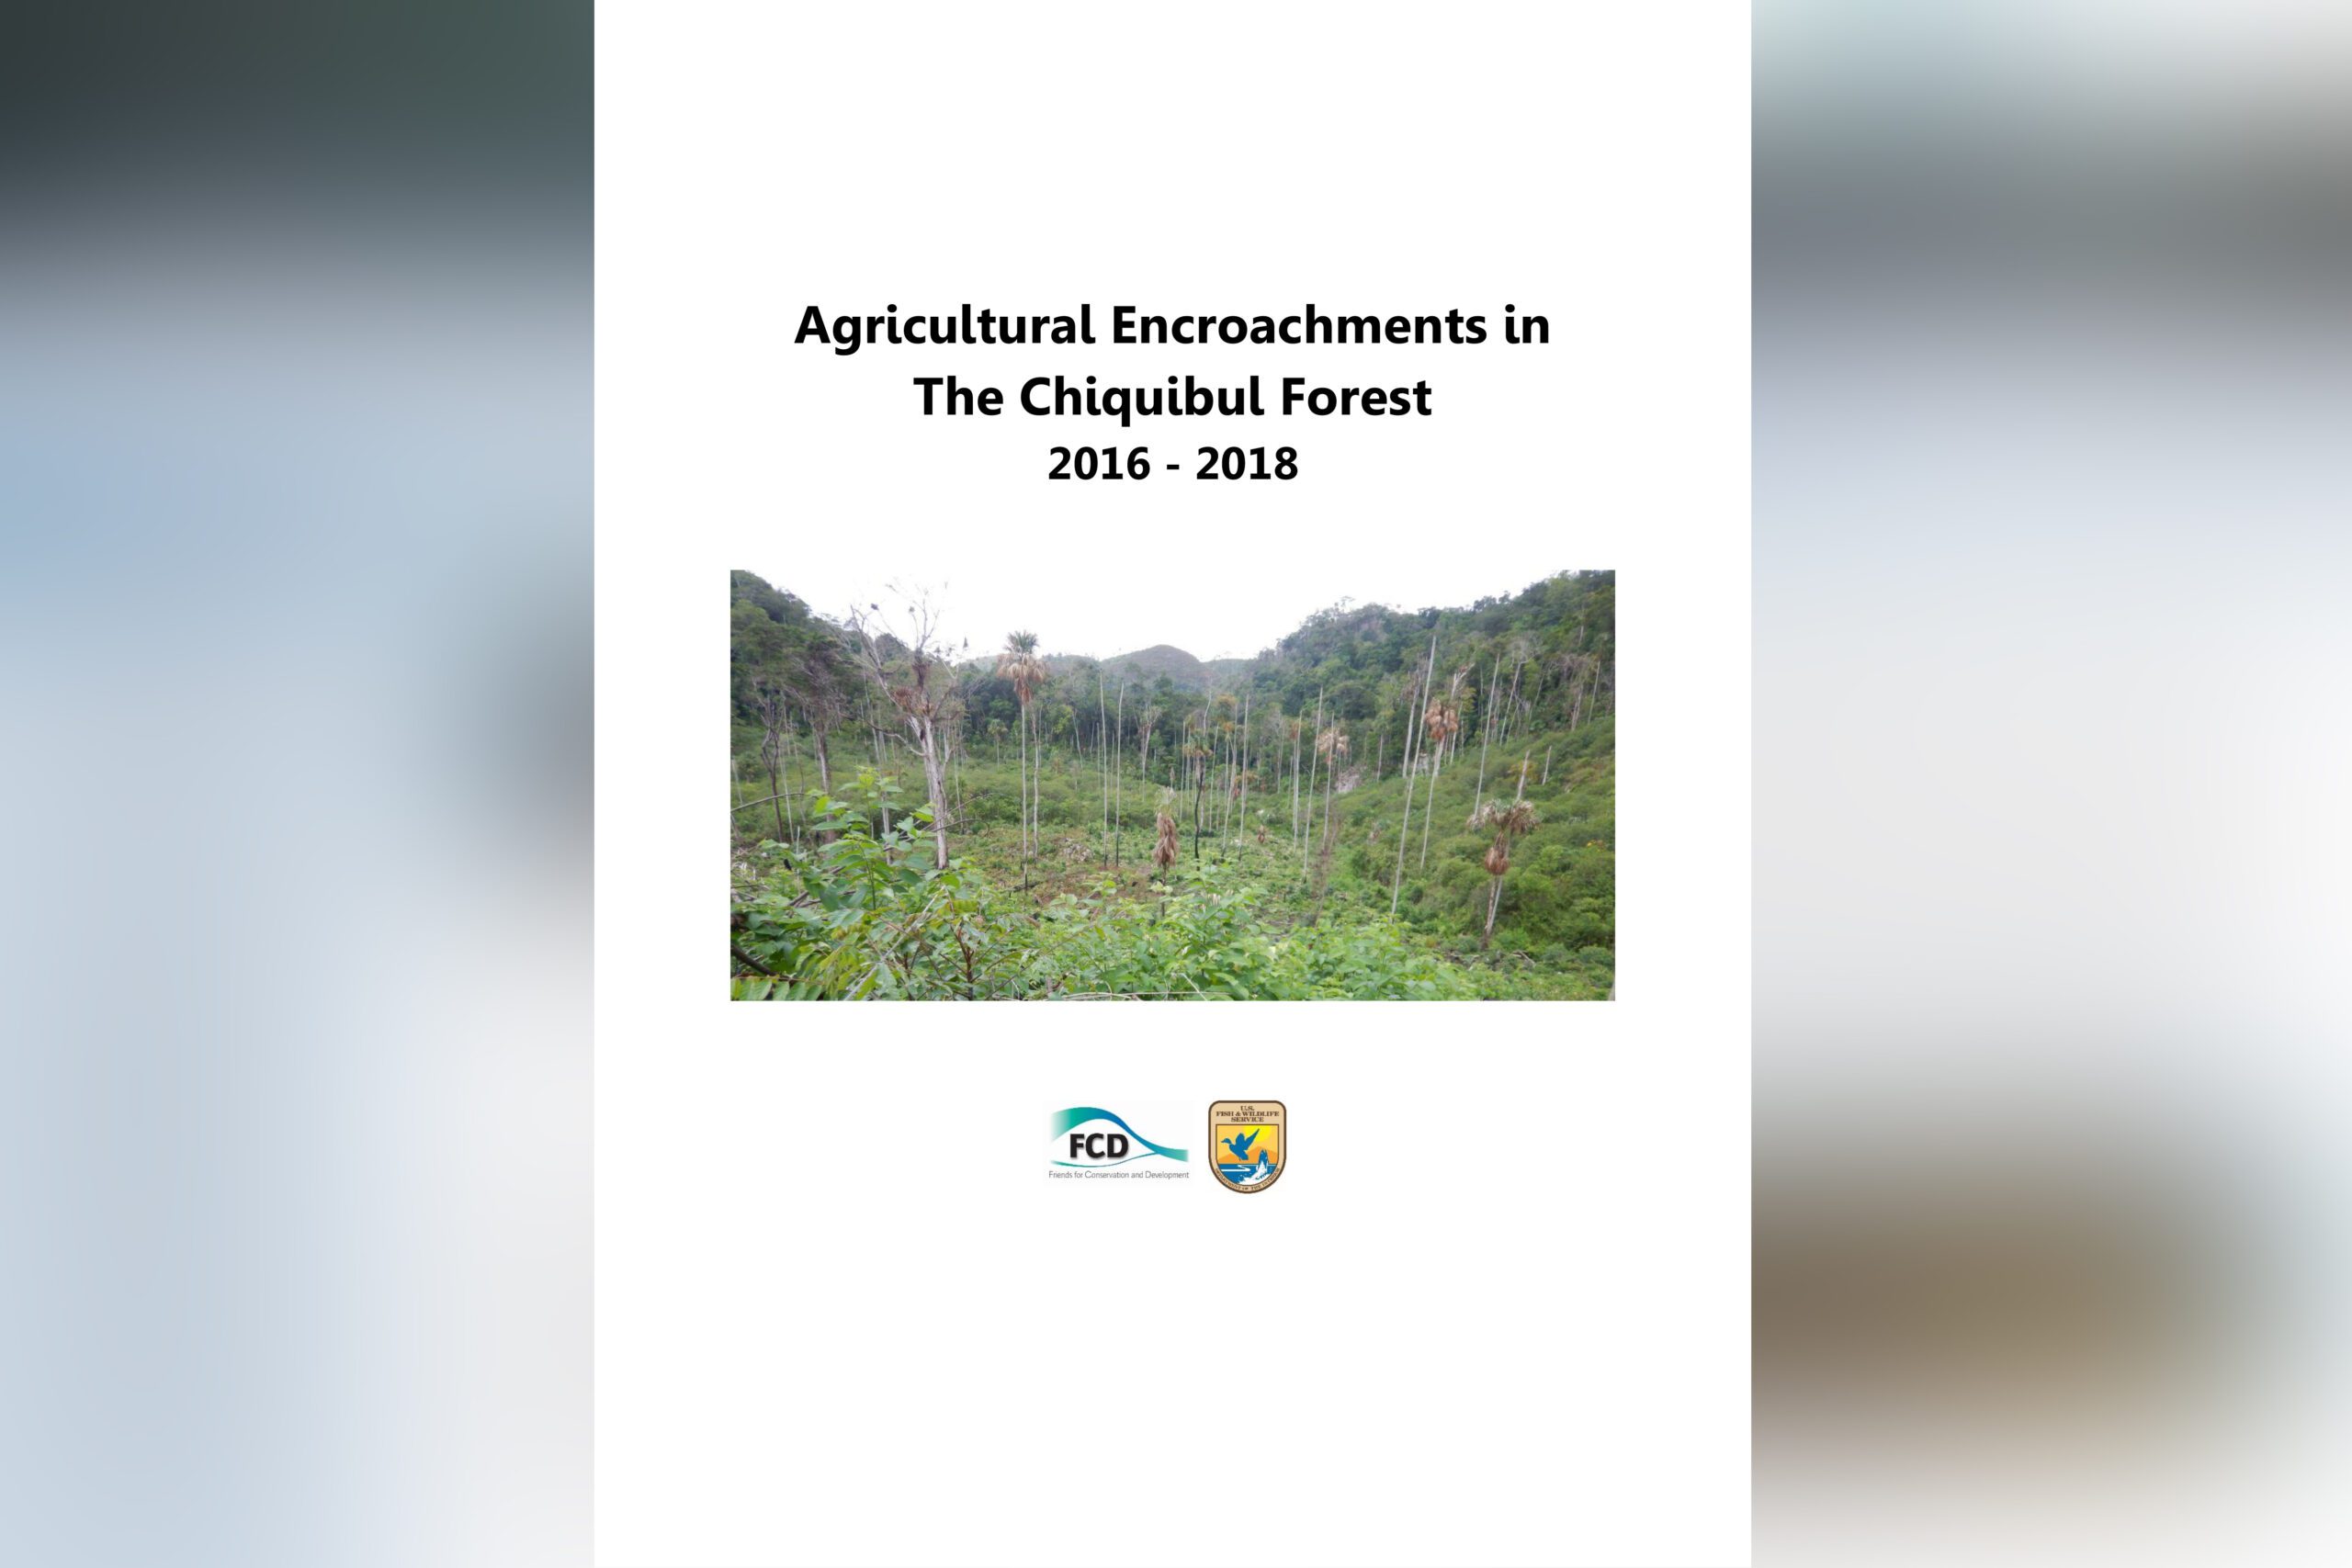 Agricultural Encroachments in The Chiquibul Forest 2016 – 2018